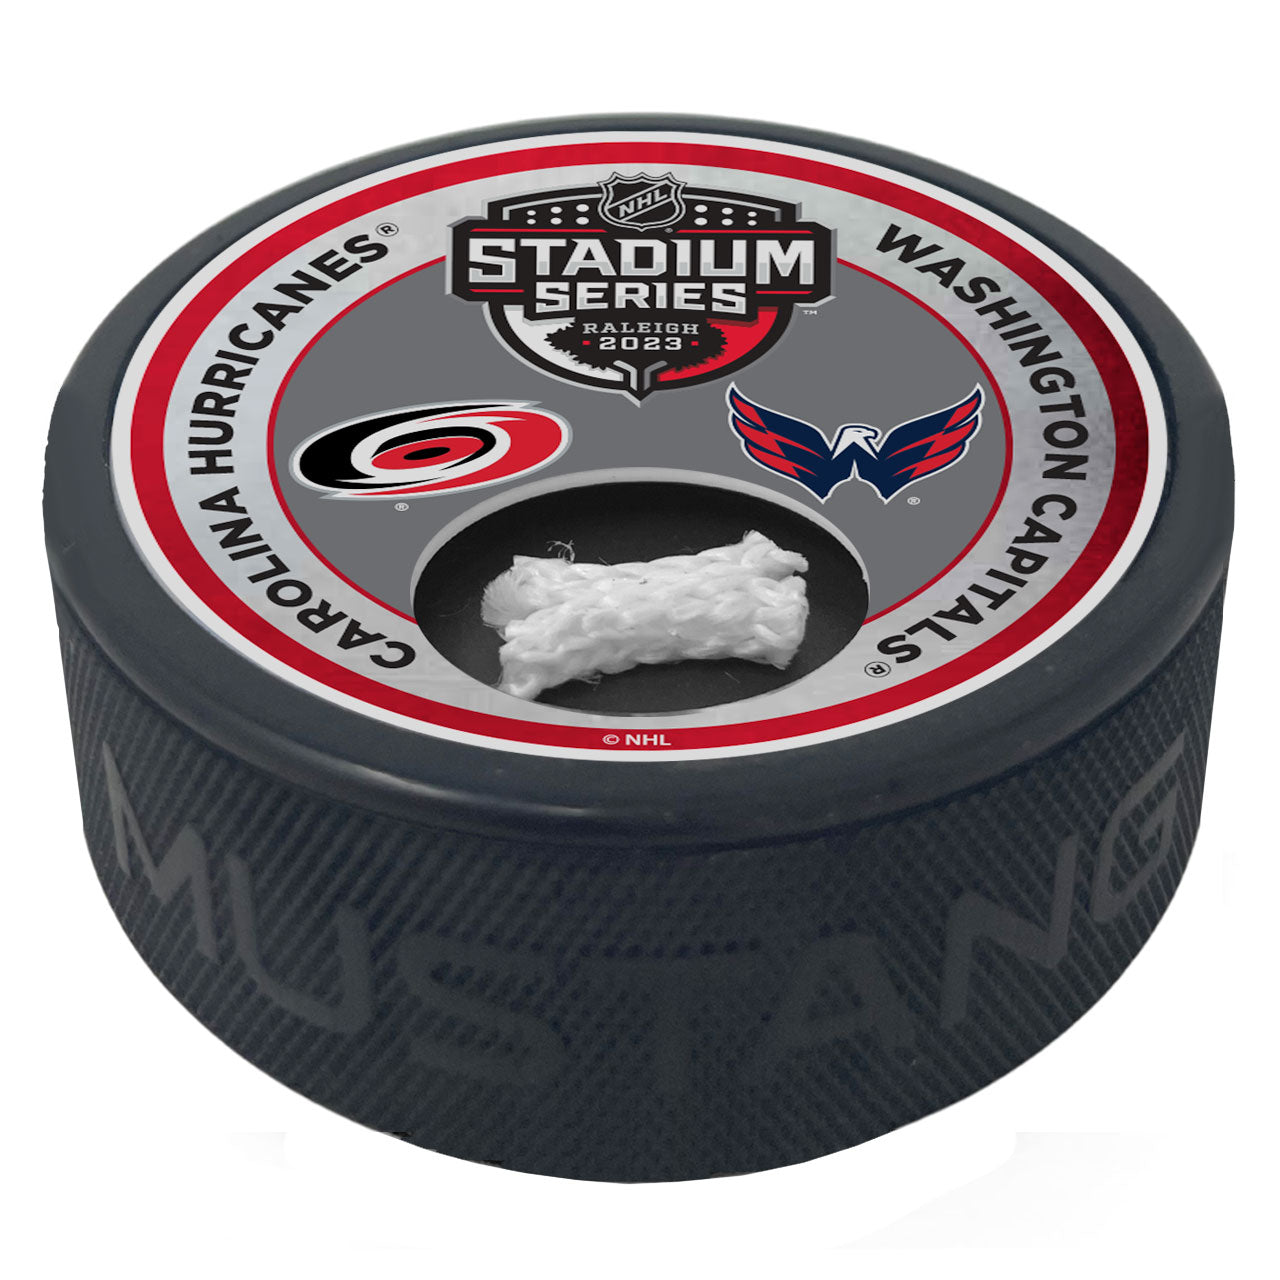 Mustang Products Stadium Series 2023 Game Used Net Puck